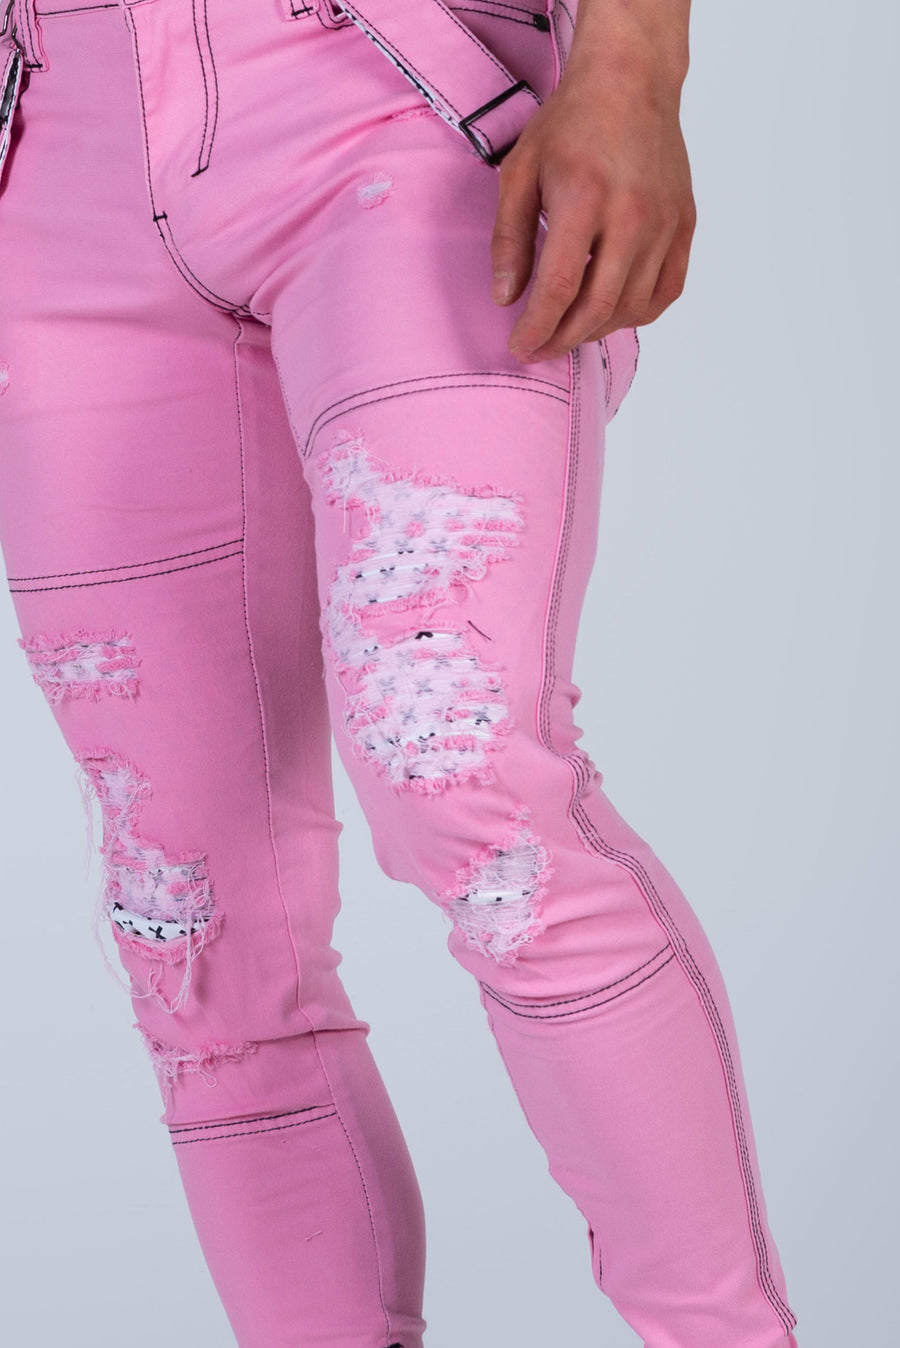 EARL PINK JEAN with Holes & Backing